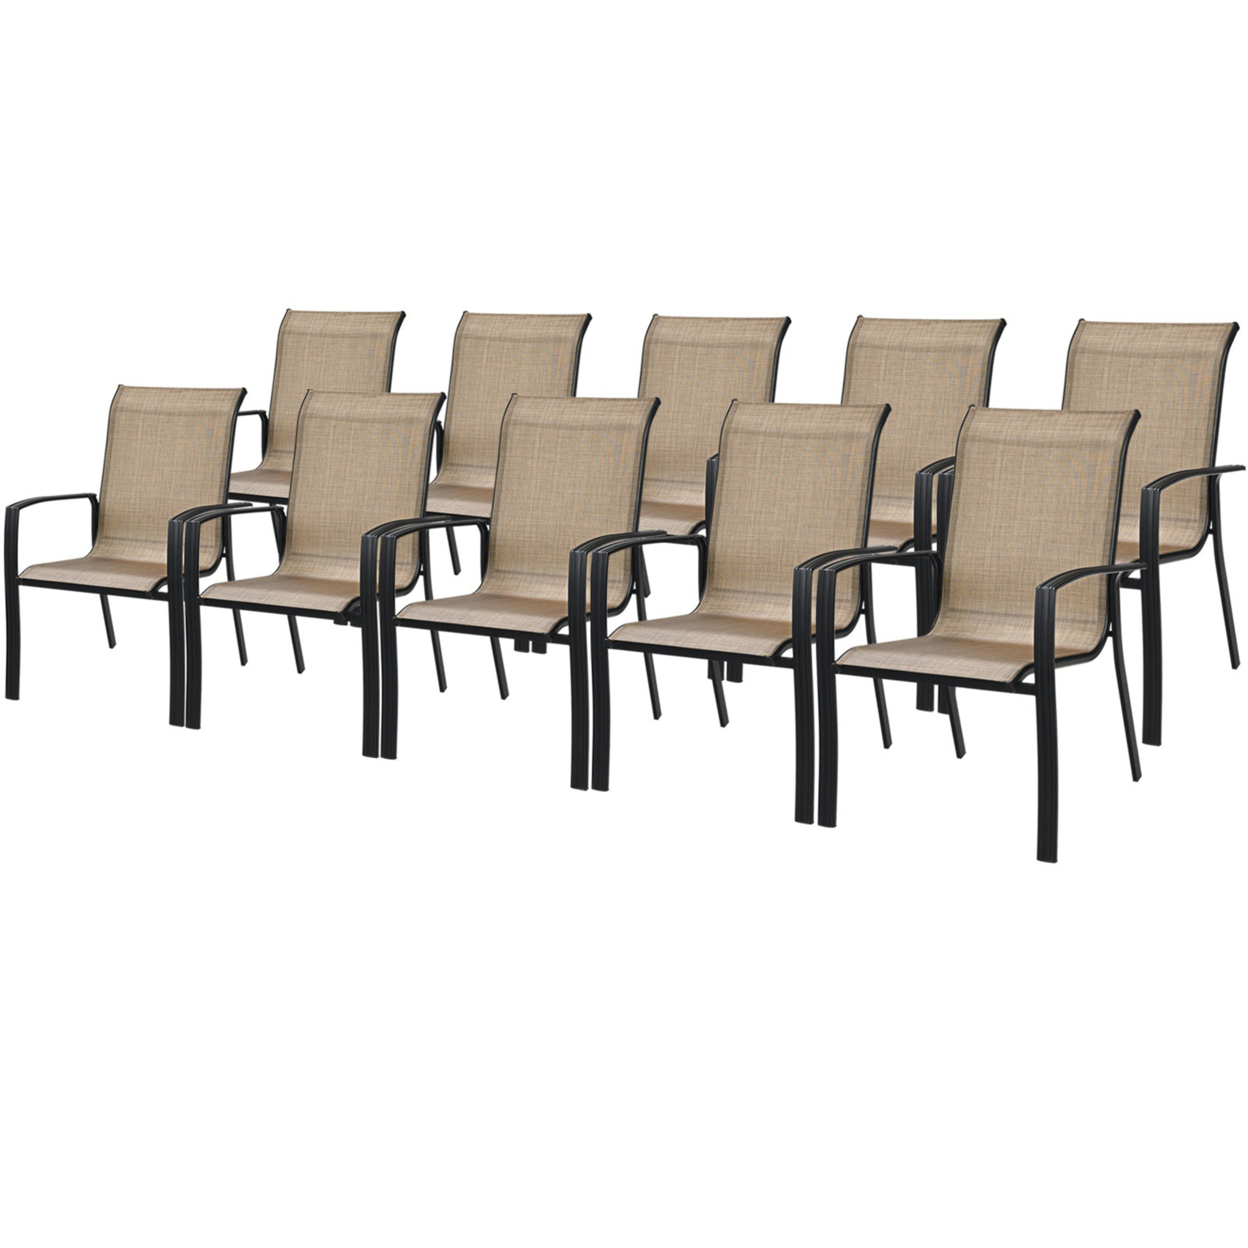 Outdoor Stackable Dining Chair Patio Armchair W/ Breathable Fabric - Brown, 10 Pcs